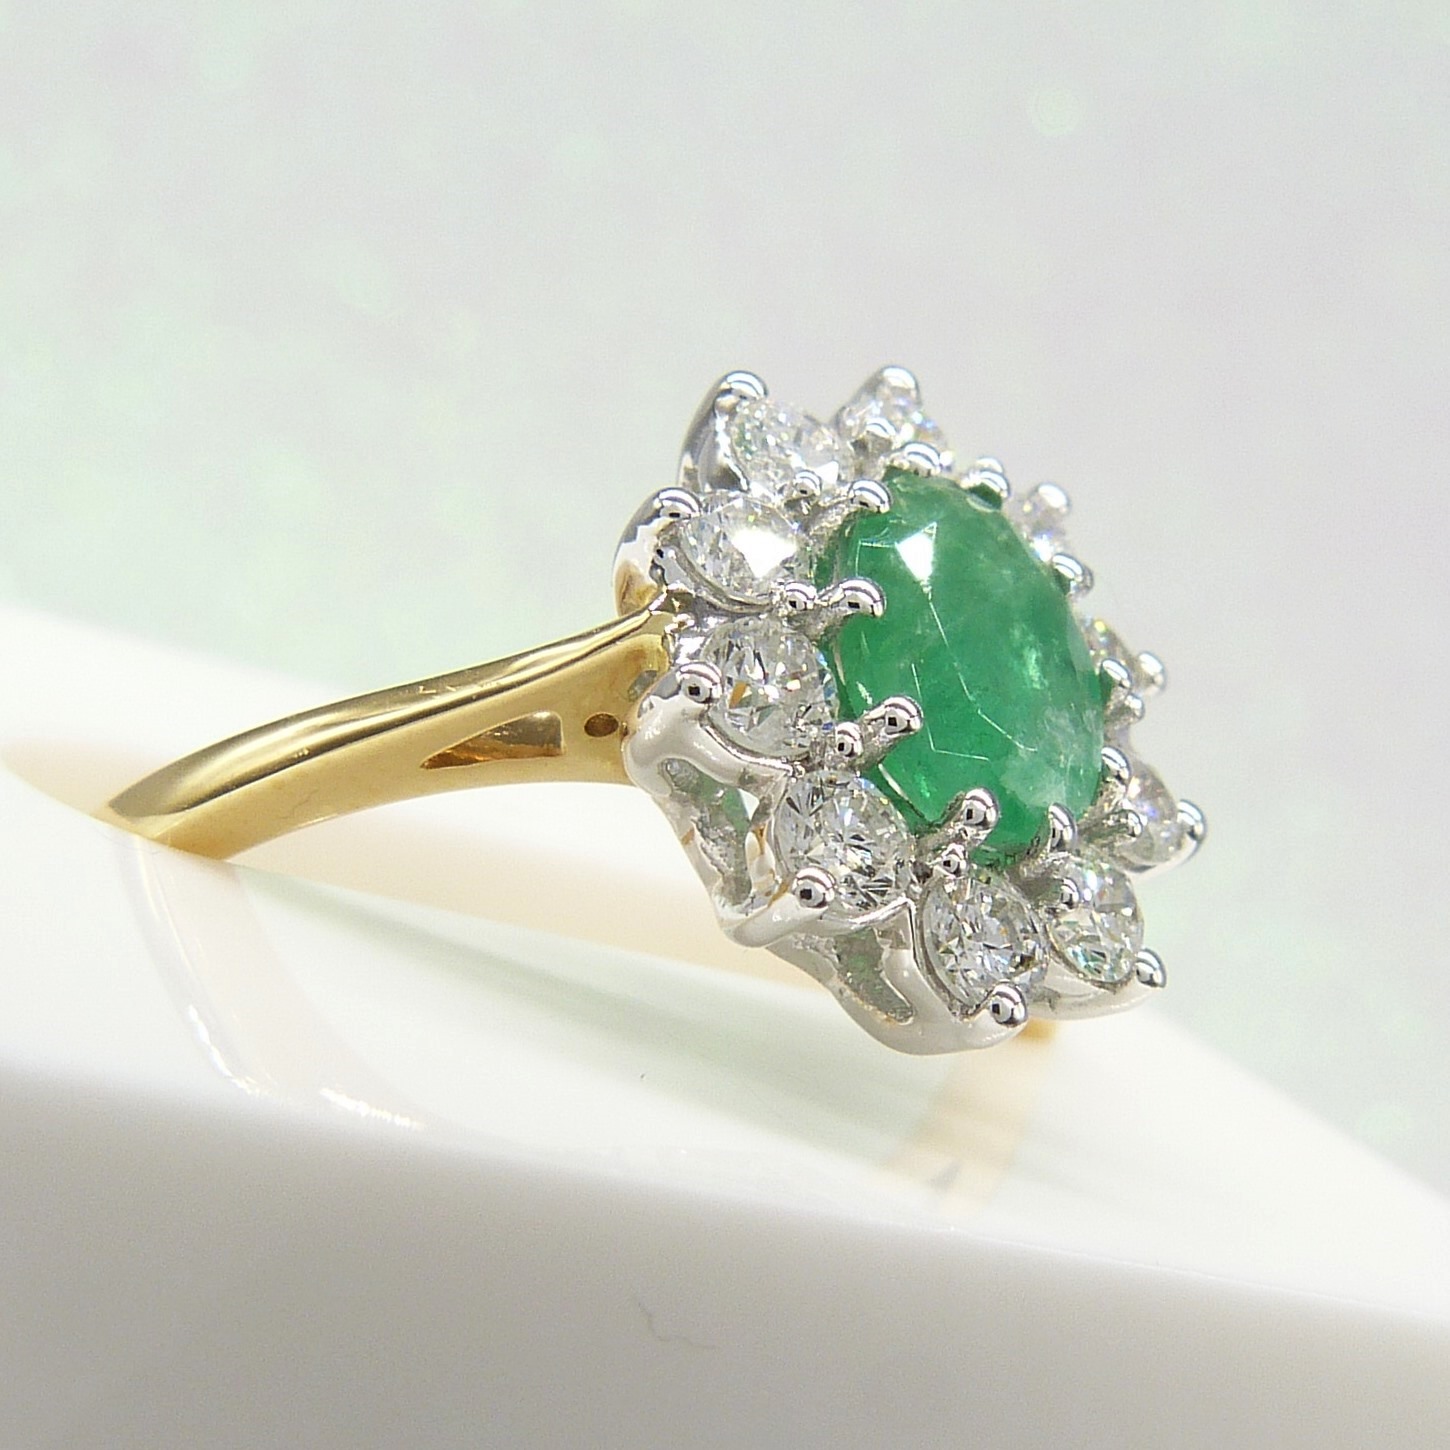 Certificated 18ct Yellow and White Gold Emerald and Diamond Cluster Ring - Image 6 of 7